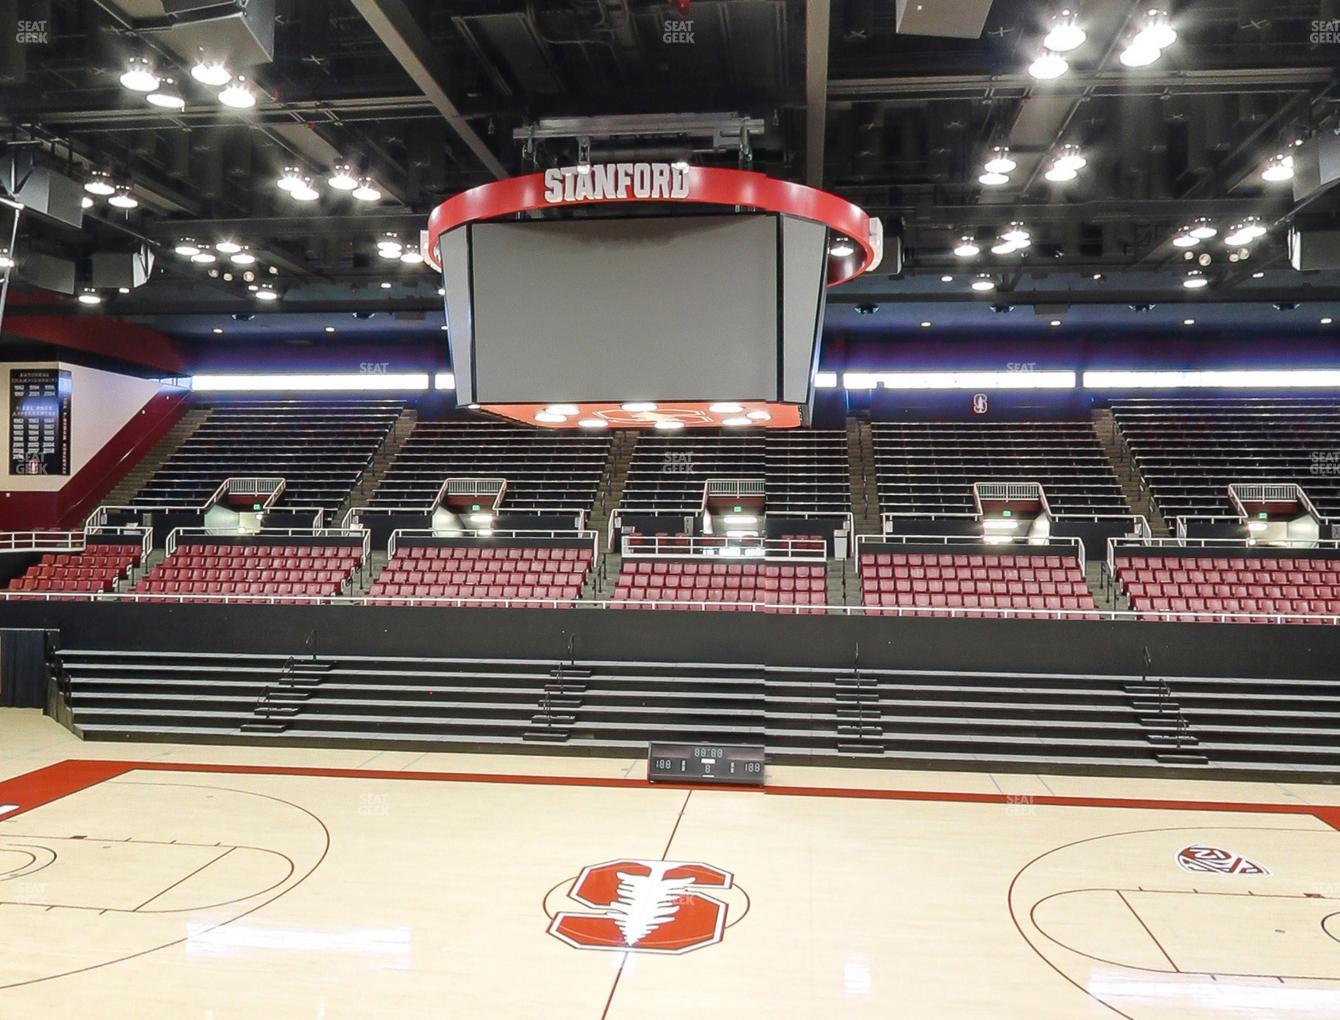 Maples Pavilion 3d Seating Chart